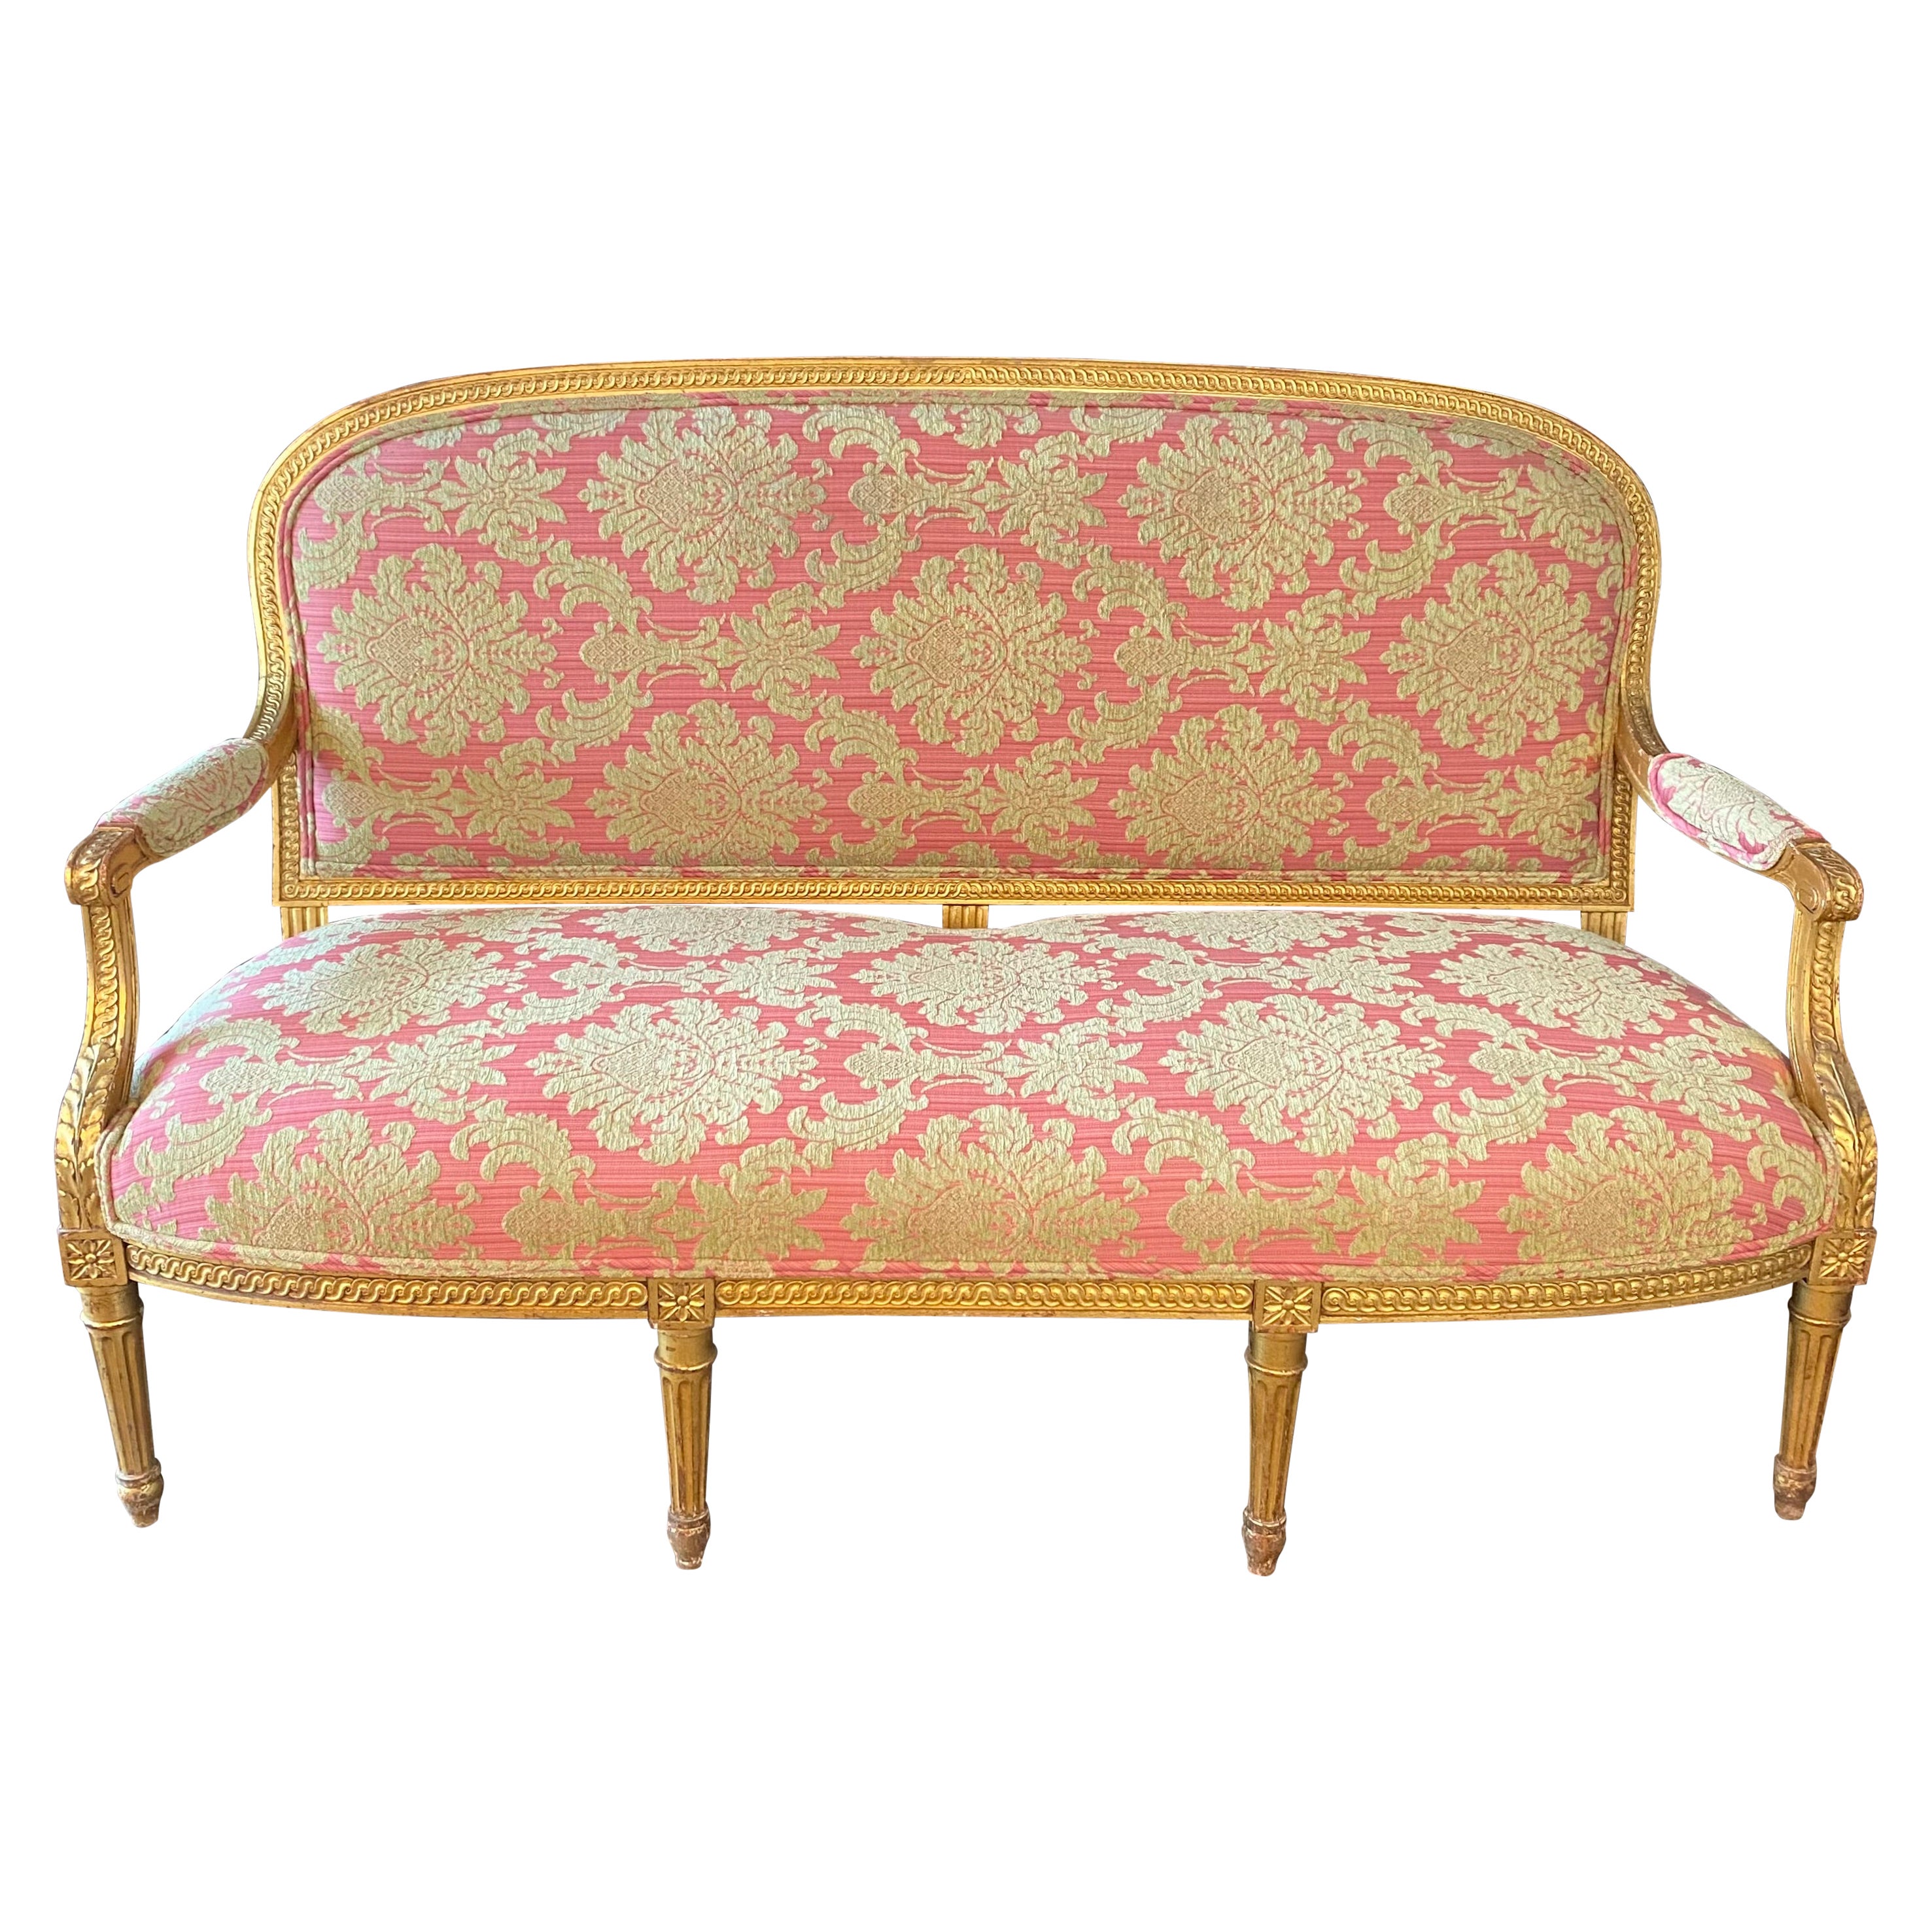 Glamorous French Louis XVI Style Gold Giltwood Sofa with Damask Upholstery For Sale